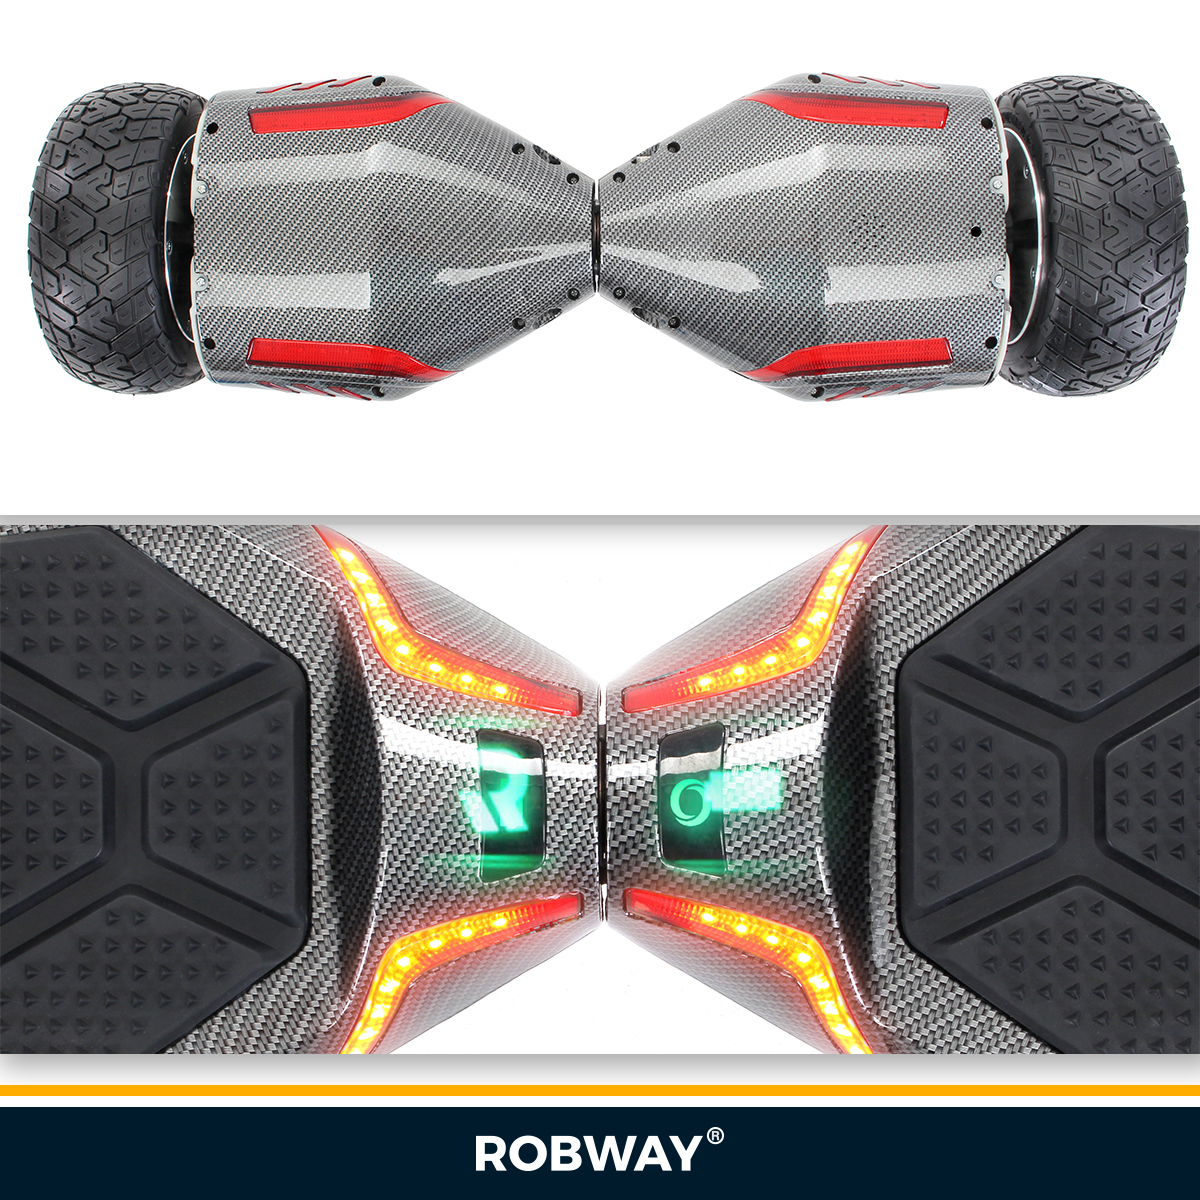 Board Carbon) Balance (8,5 ROBWAY Zoll, X2 Offroad-Hoverboard